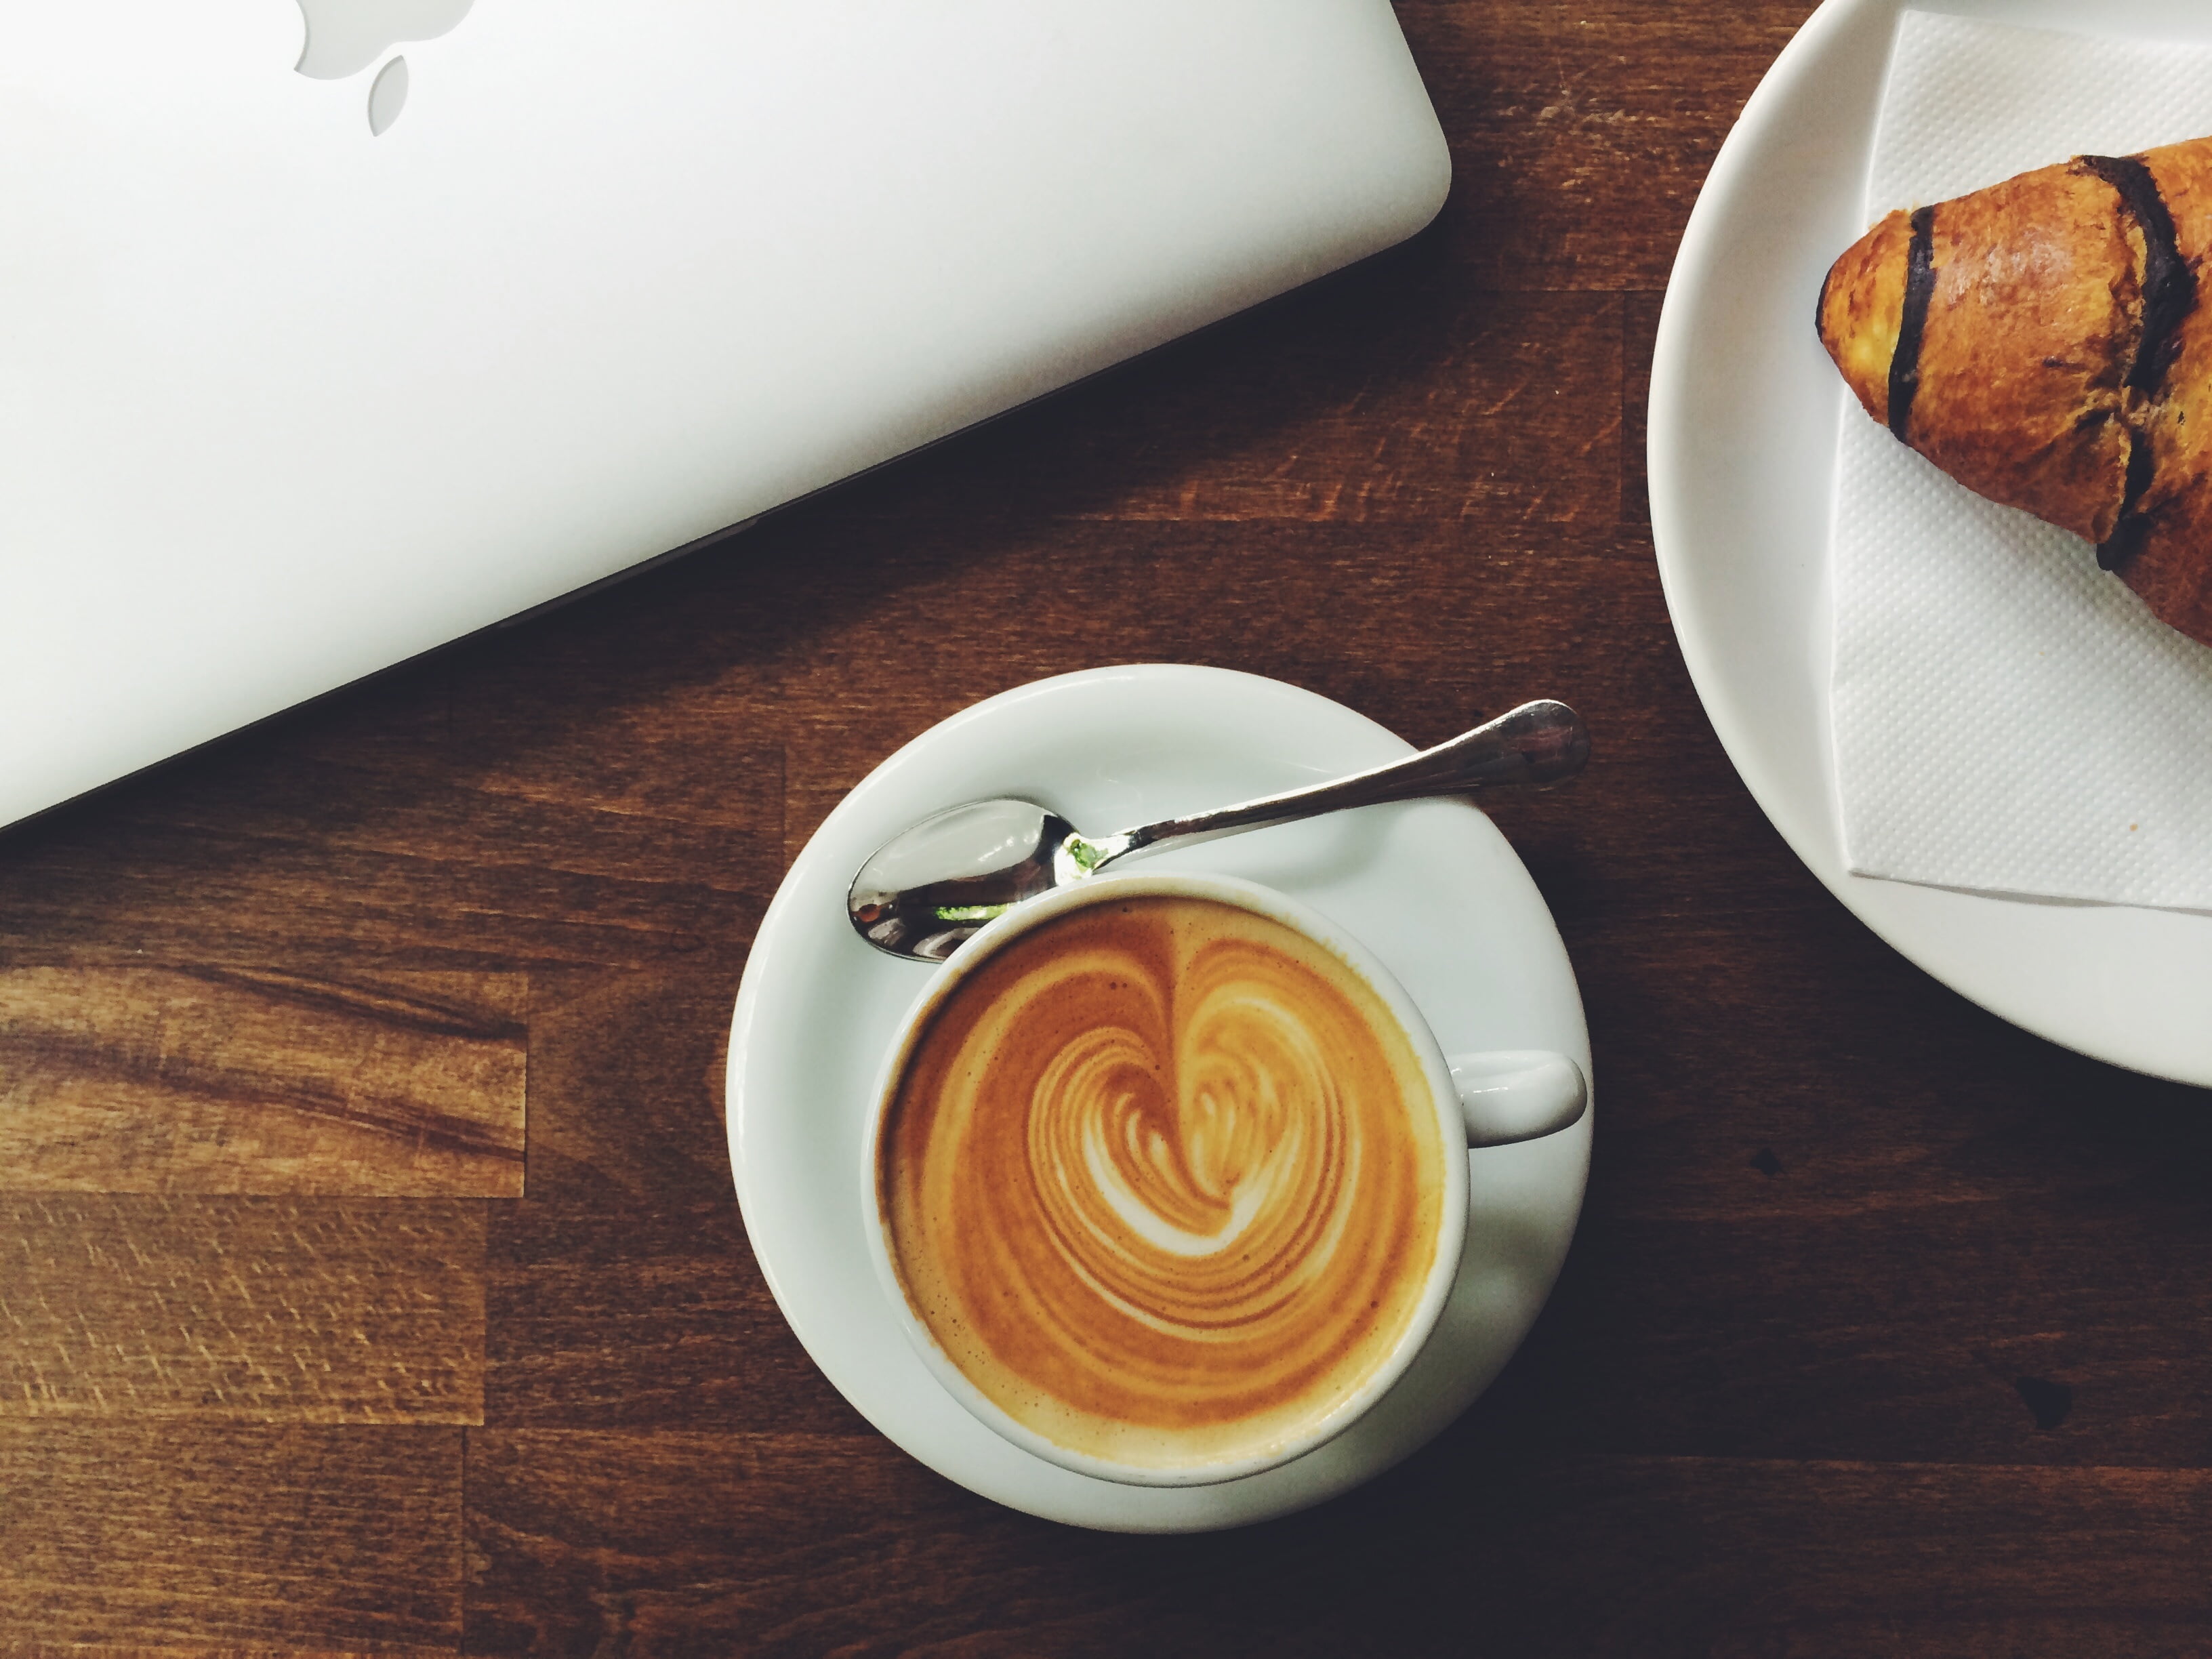 Coffee Latte On White Ceramic Mug And Saucer Hd Wallpaper - Cappuccino And Macbook , HD Wallpaper & Backgrounds